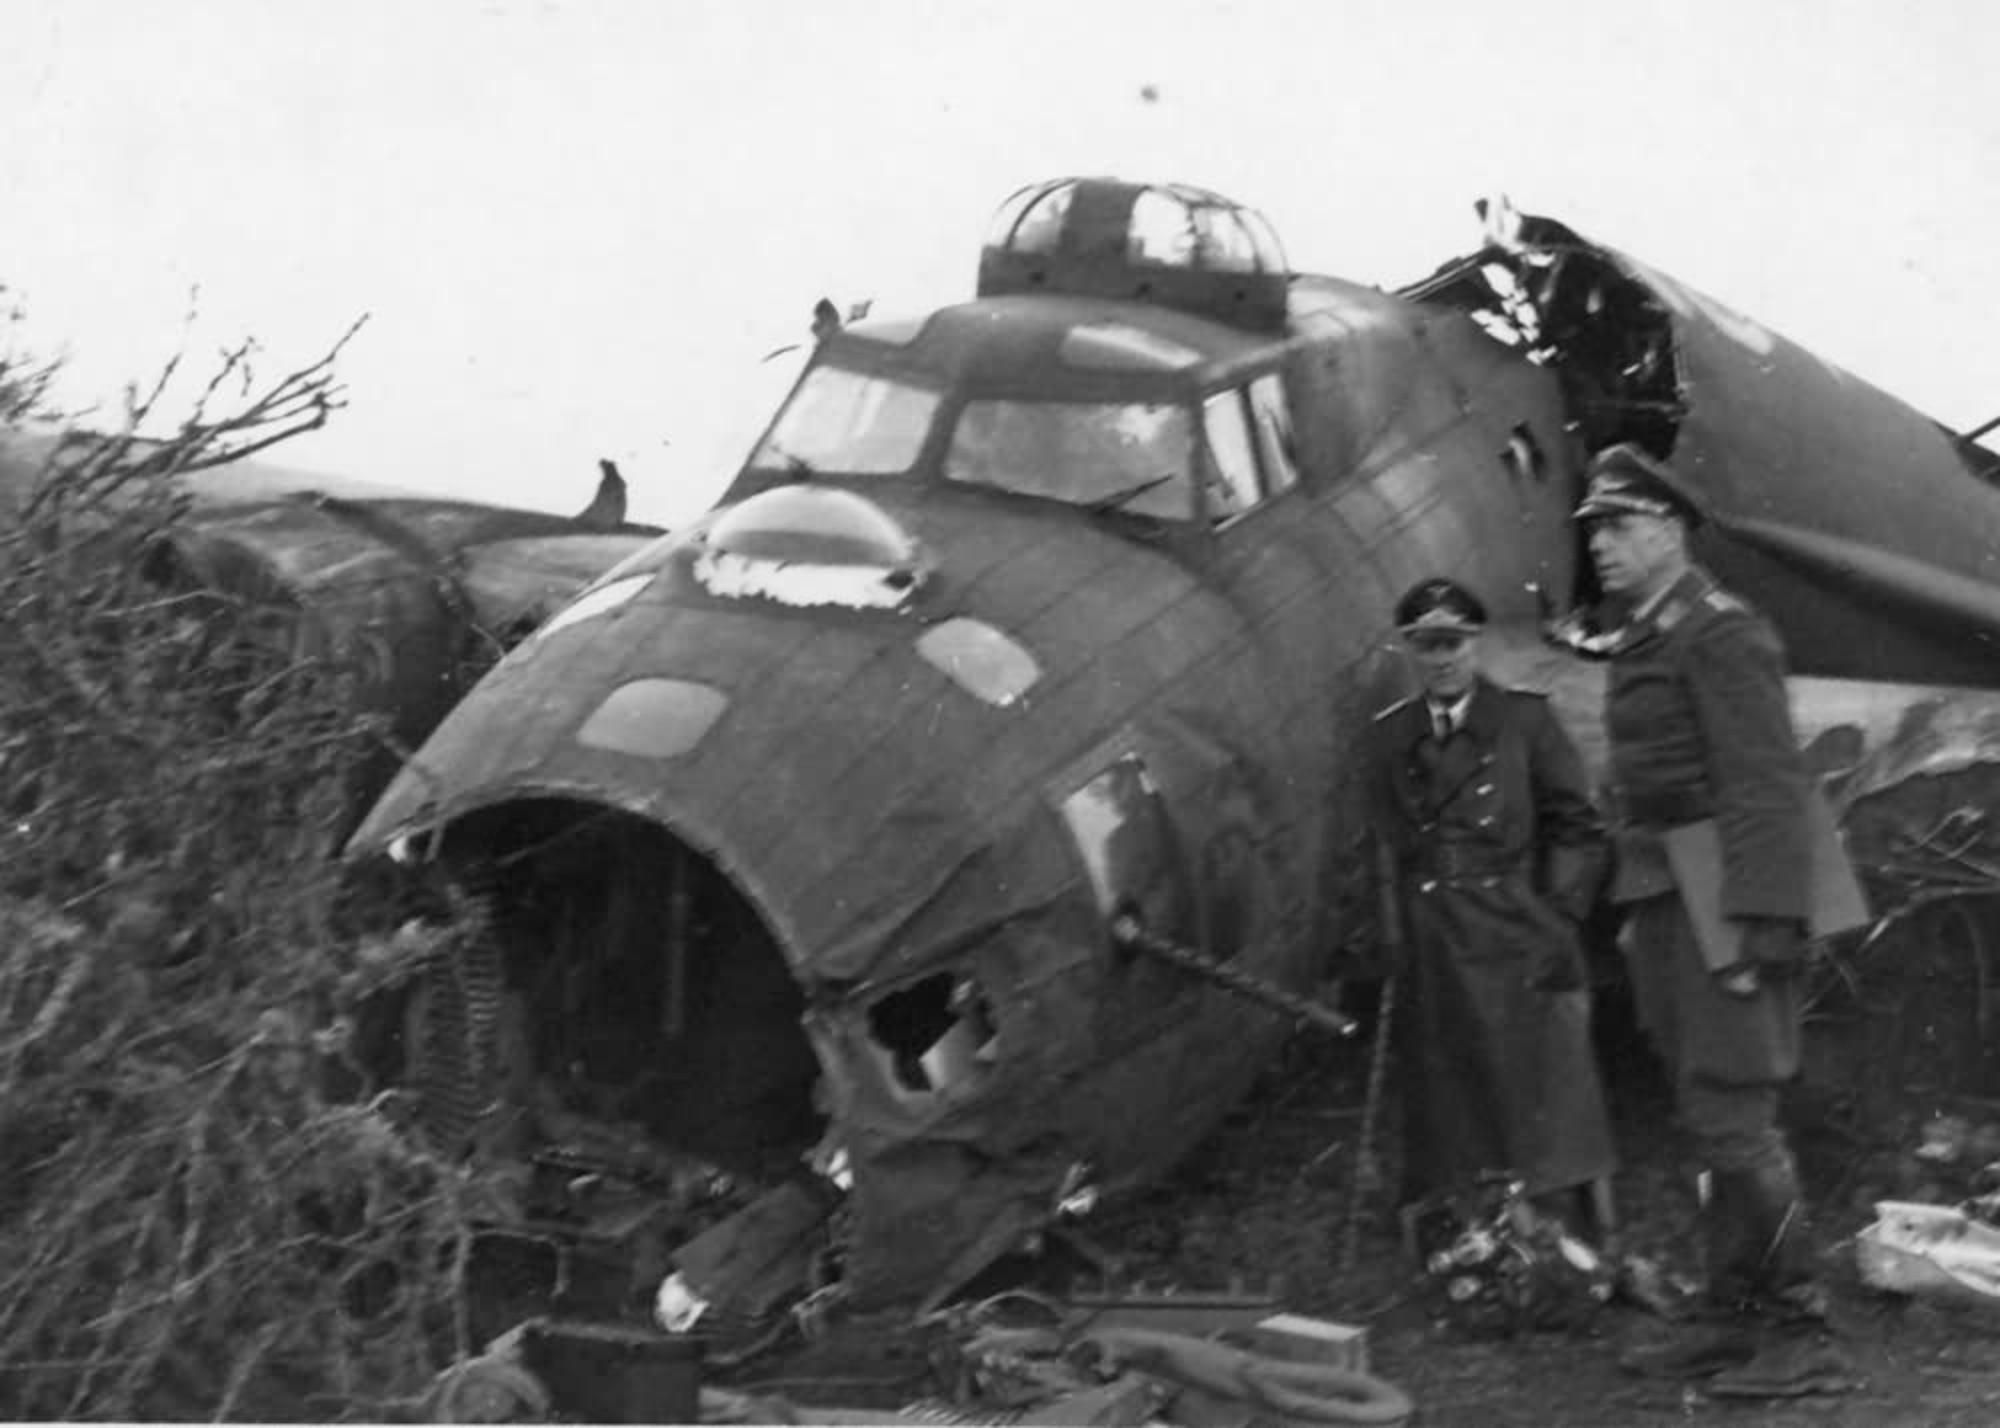 Several Luftwaffe officers inspect a crashed B-17 somewhere in Germany. Between August 1942 and May 8, 1945, Eighth Air Force flew 10,631 missions and lost 4,145 B-17s, each with a 10-man crew. (Archive photo)